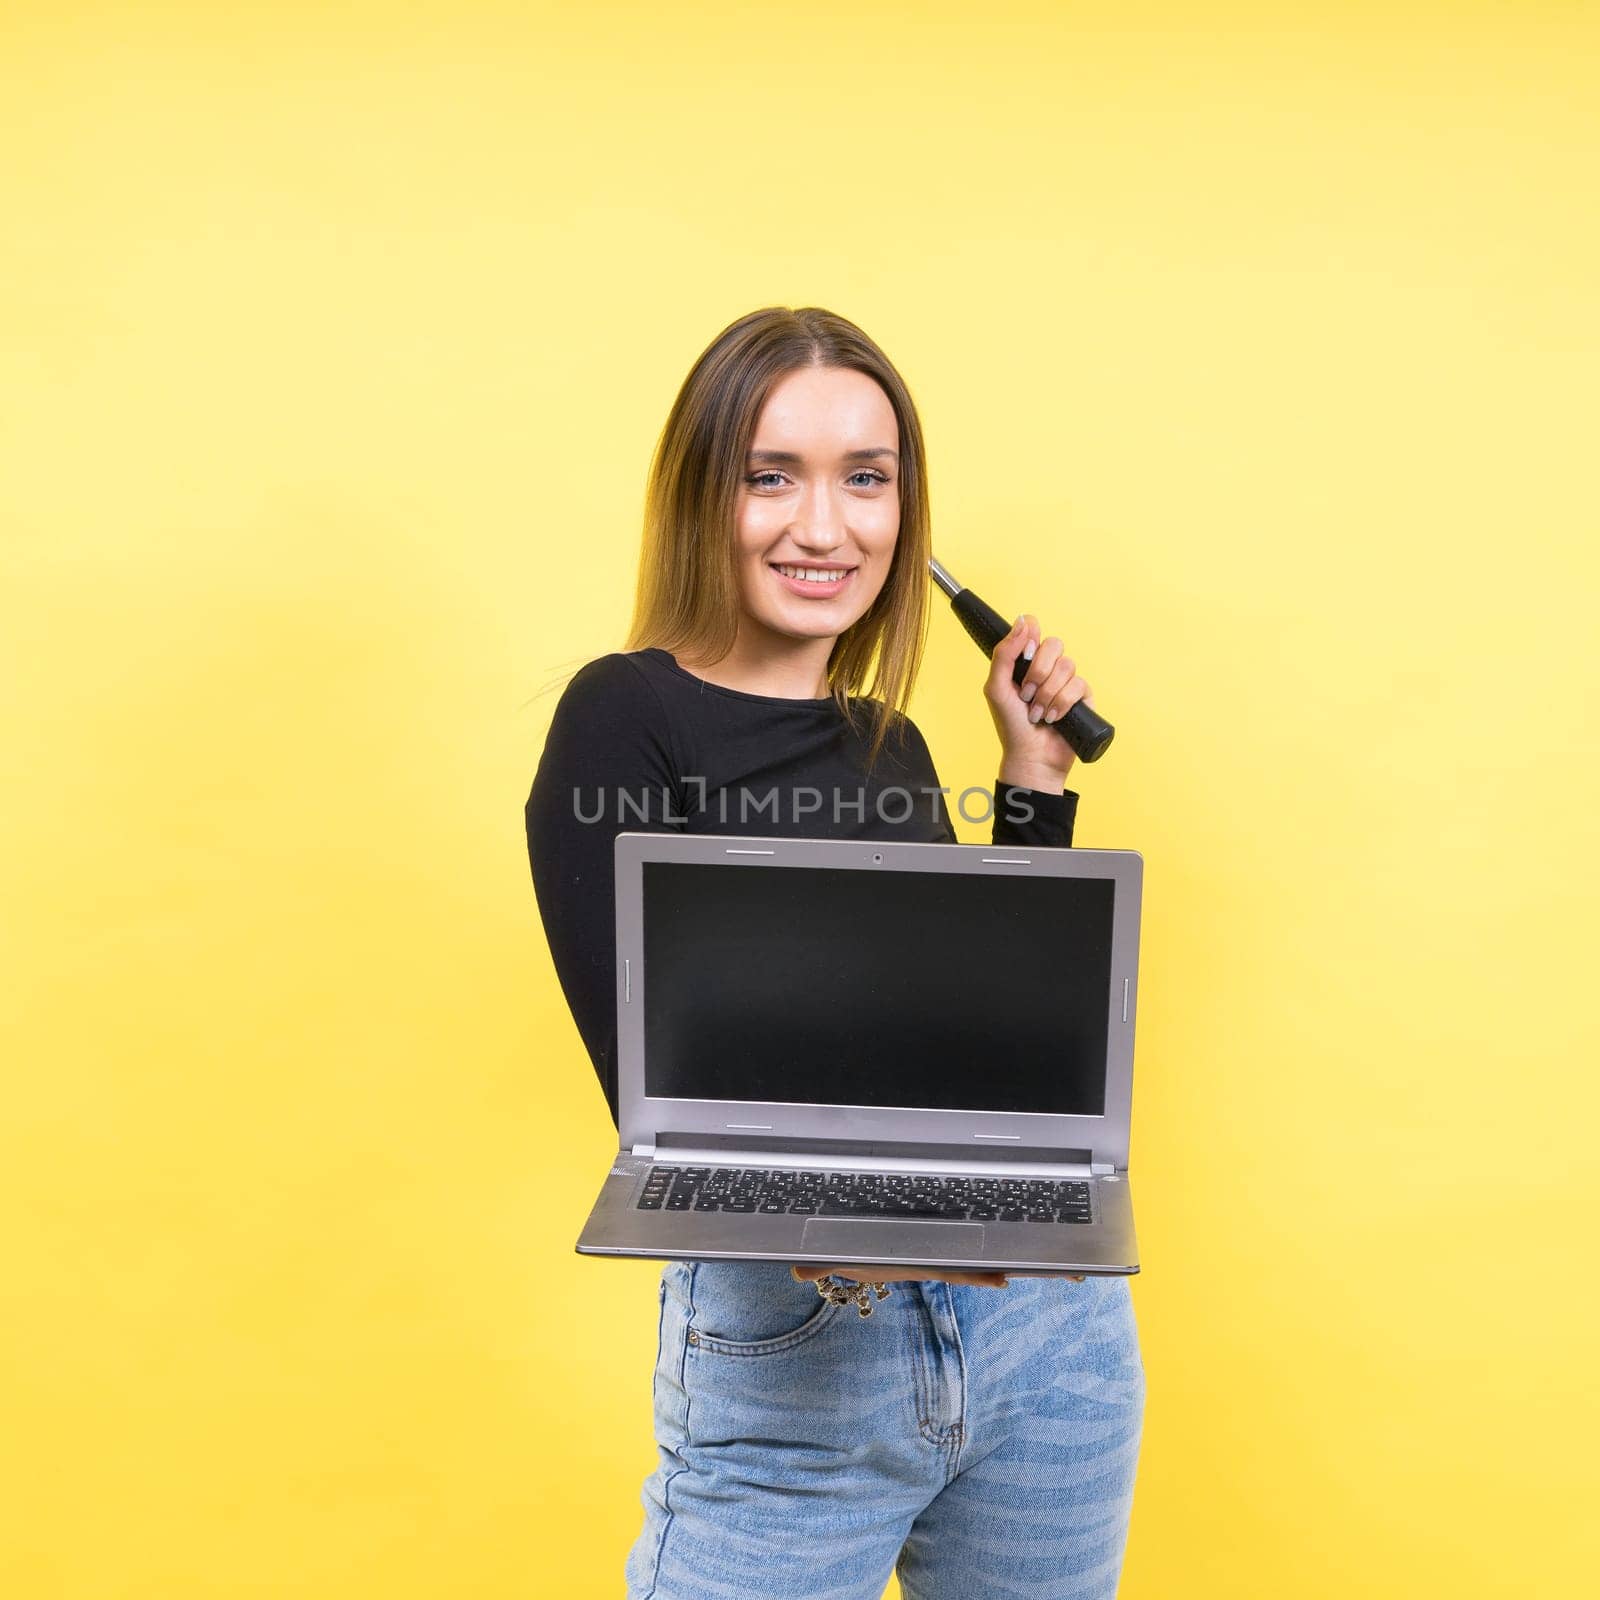 Laptop Repair. Female with hammer and laptop on a yellow background